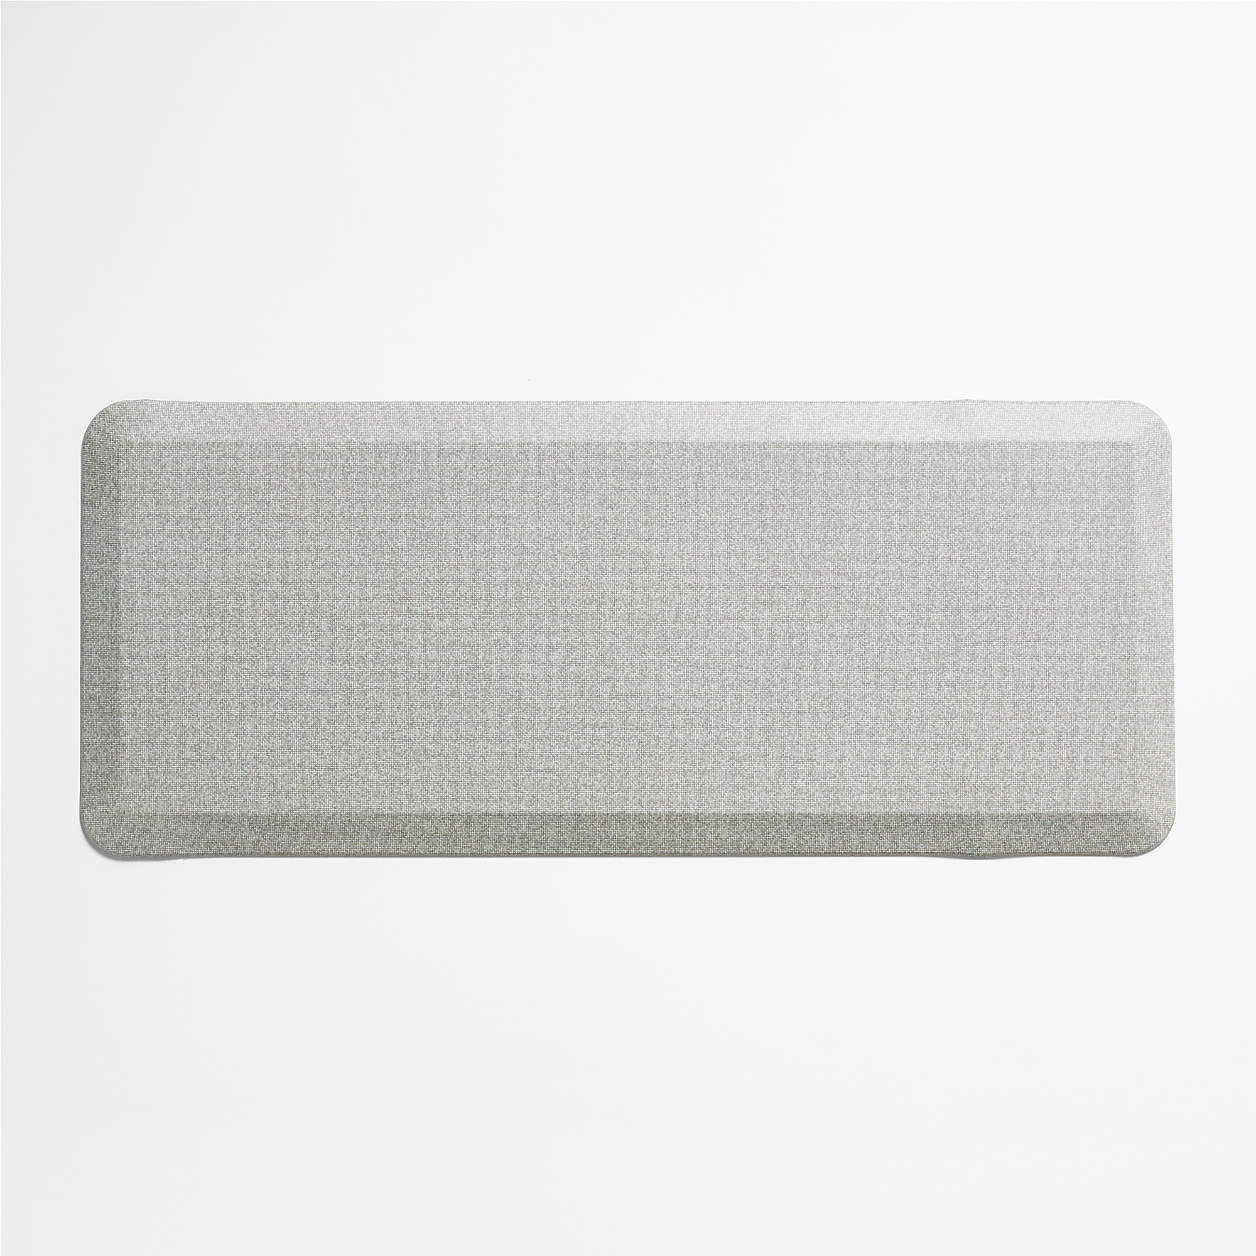 Crate And Barrel Gelpro Comfort Grey Pin Check Kitchen Mat 20x48 